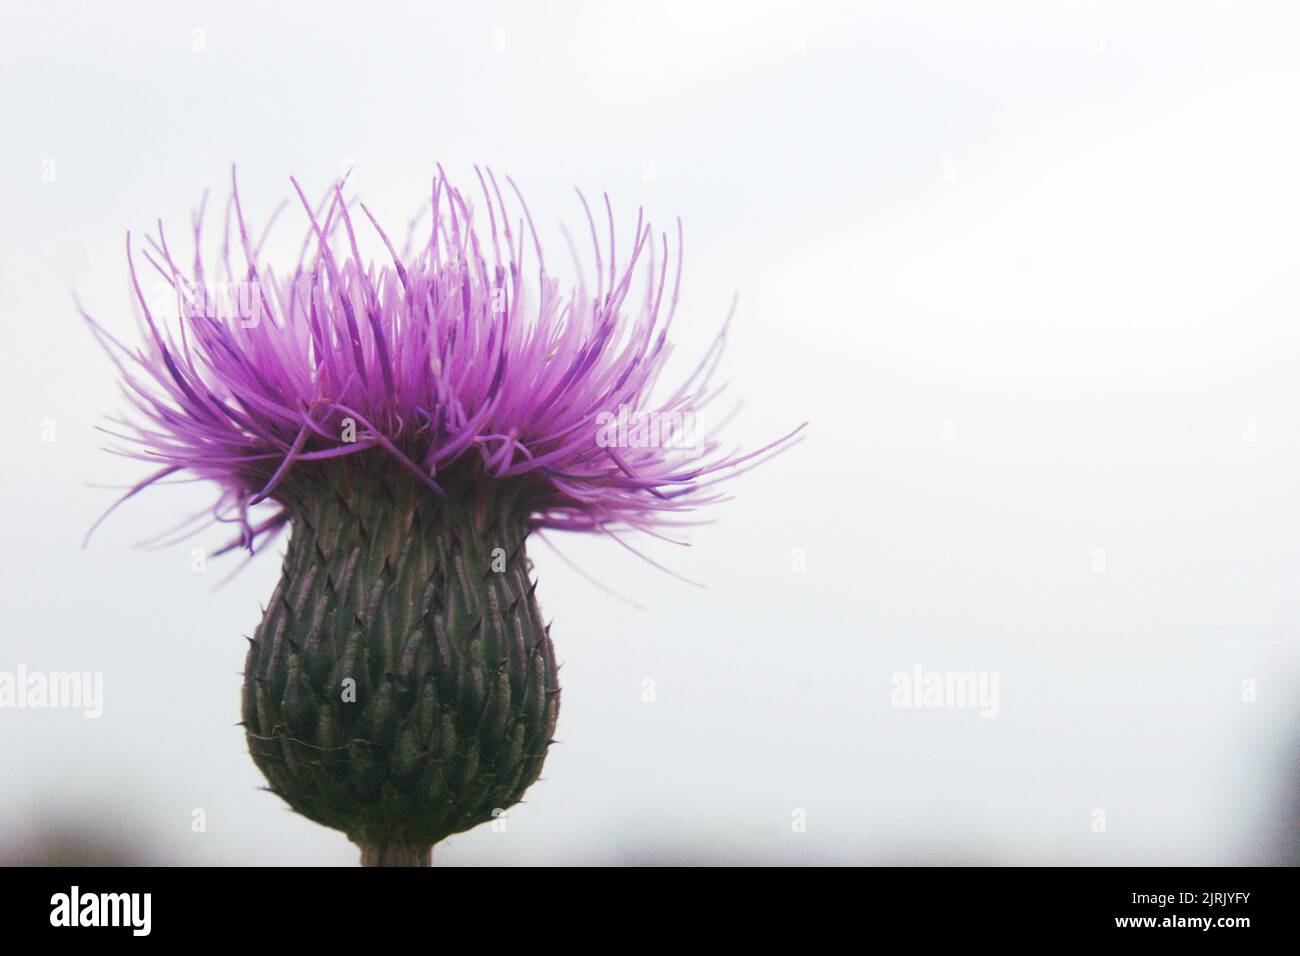 Carduus crispus or curly plumeless thistle or welted thistle (Carduus crispus) bright pink flower close up Stock Photo